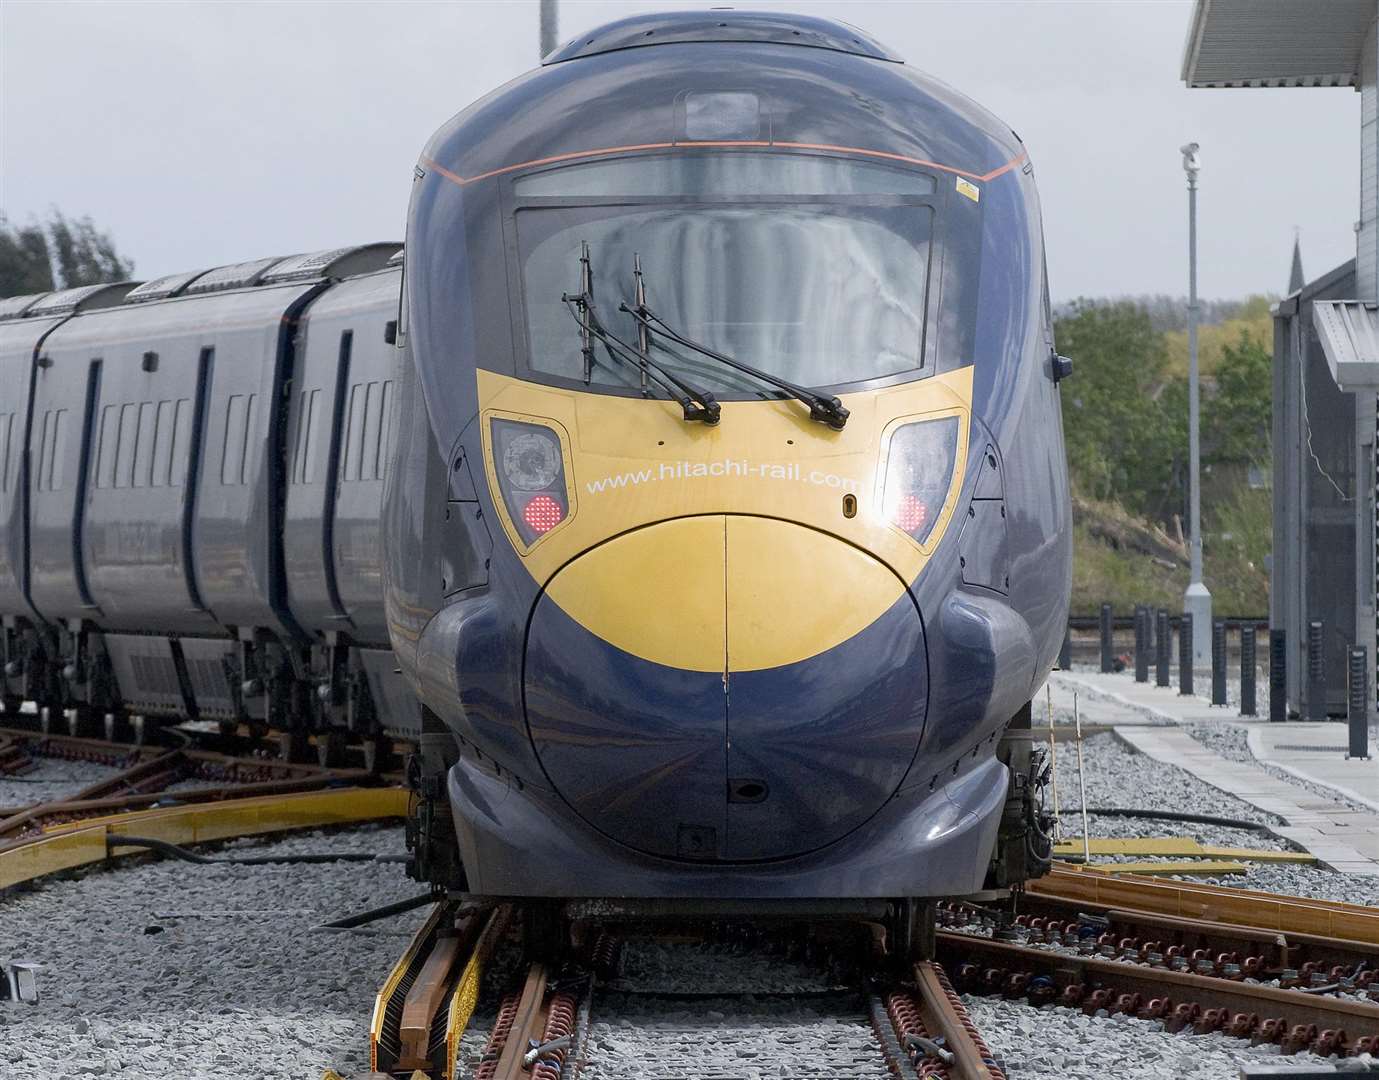 HS4Air would have connected with Ashford’s existing high-speed line